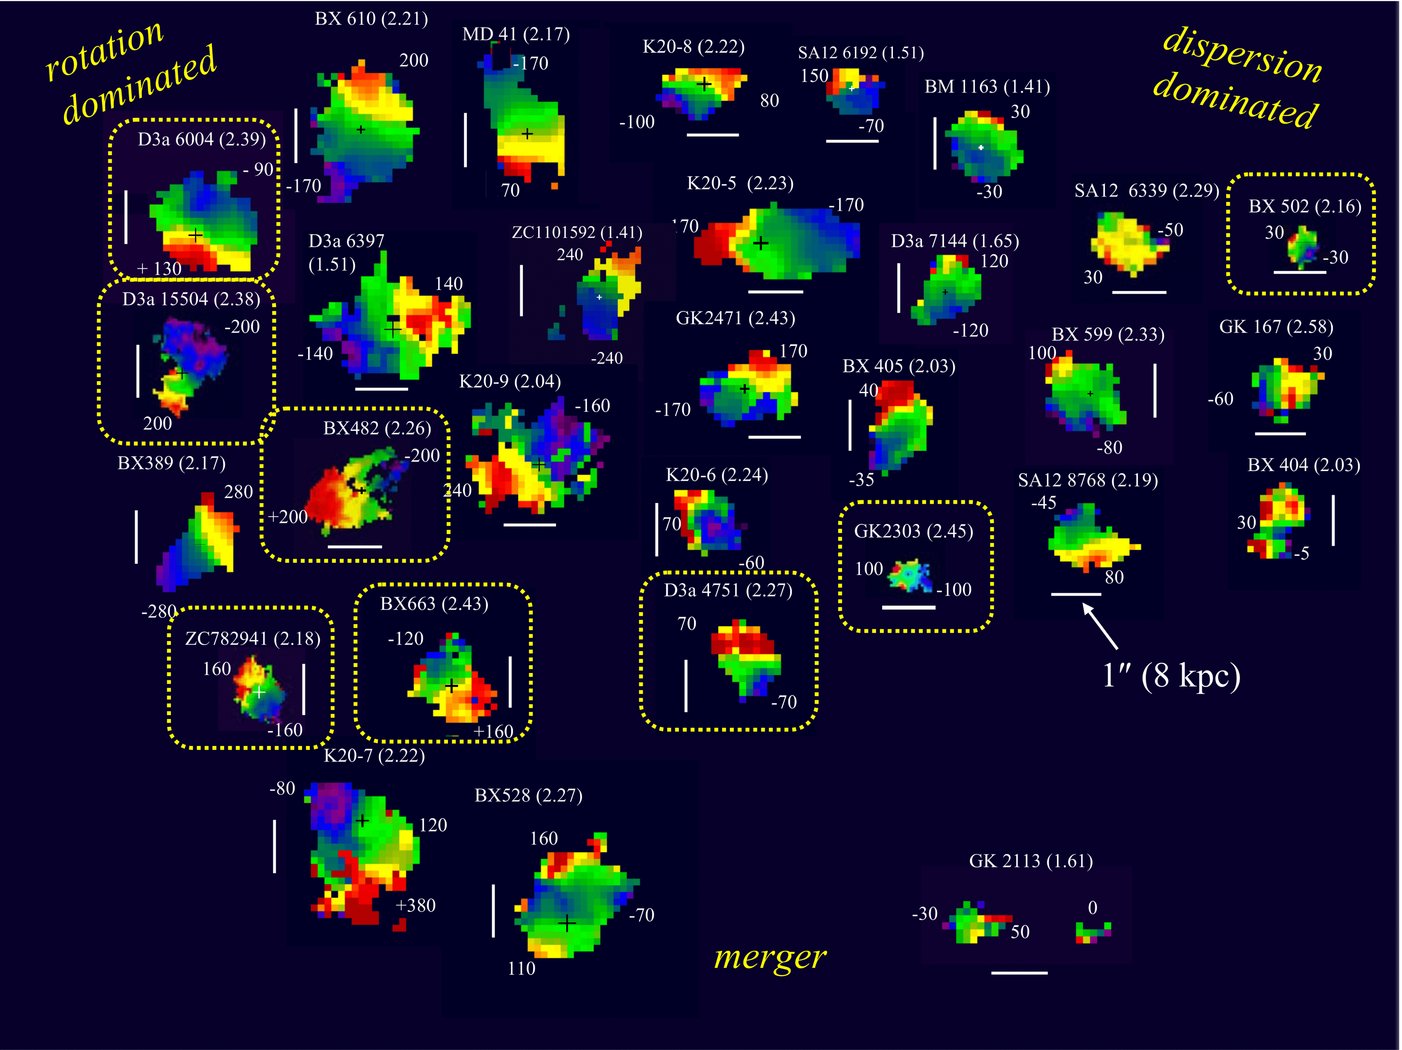 Figure 17 of Förster Schreiber et al. (2009): velocity fields for 30 galaxies at redshifts ~1 to 2